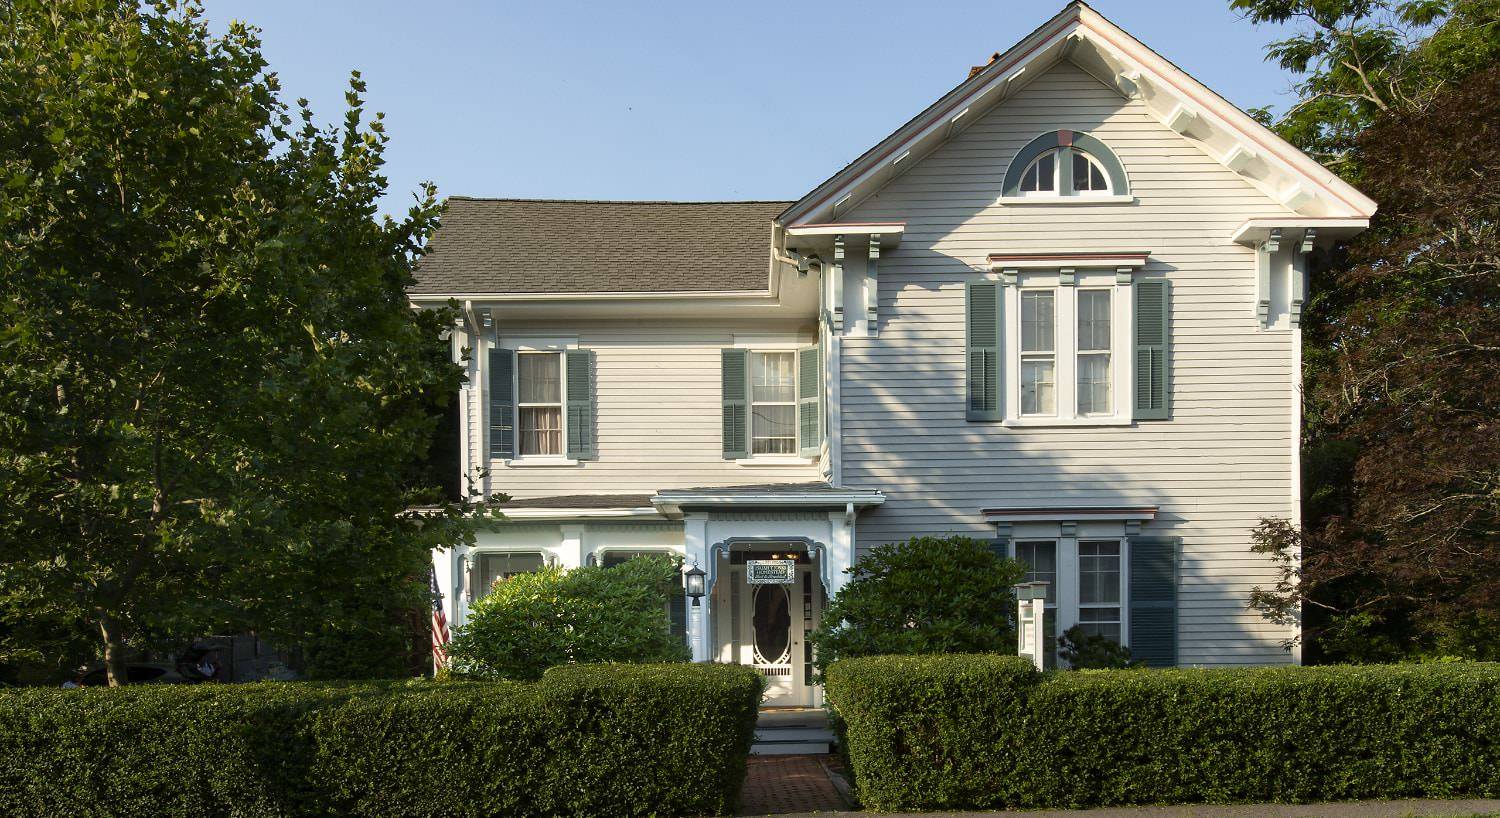 Exterior view of property painted light blue with white trim surrounded by green bushes and shrubs